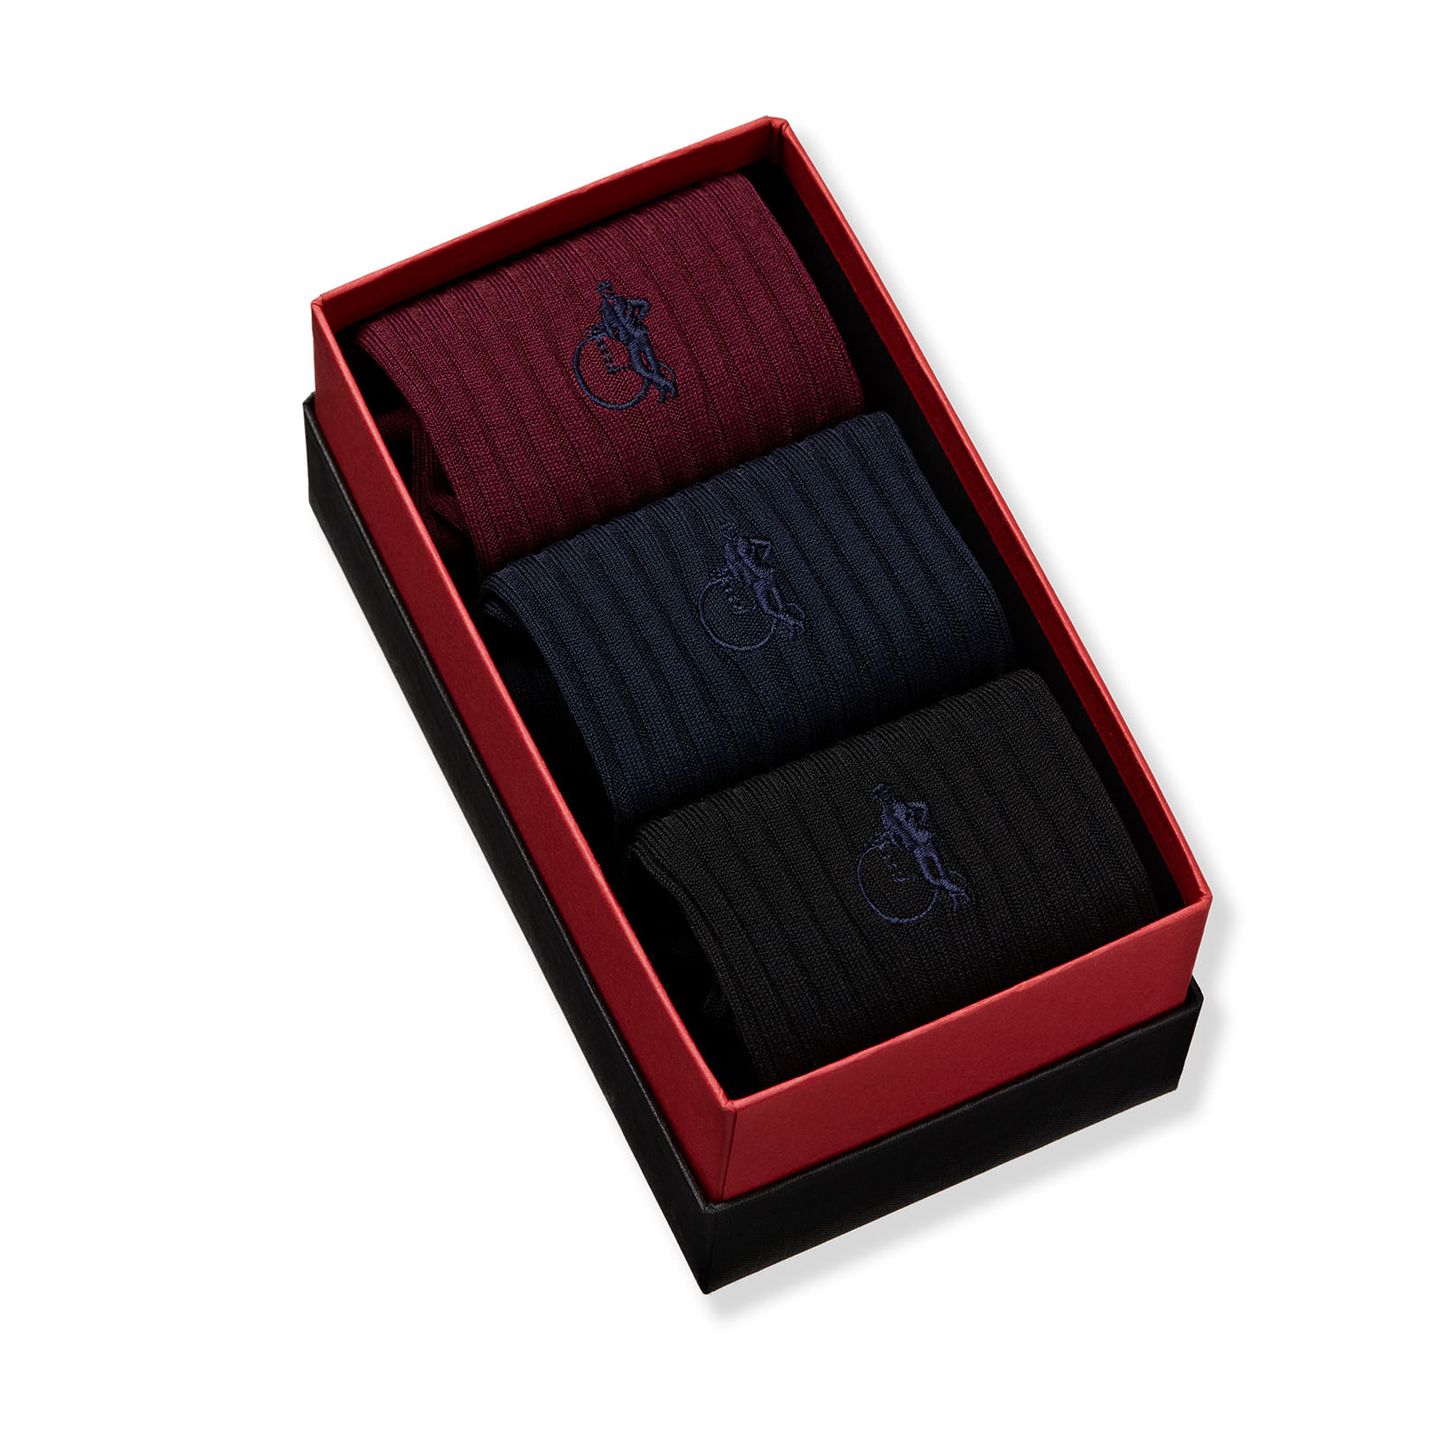 3 pair traditional sock collection in dark red, navy and black